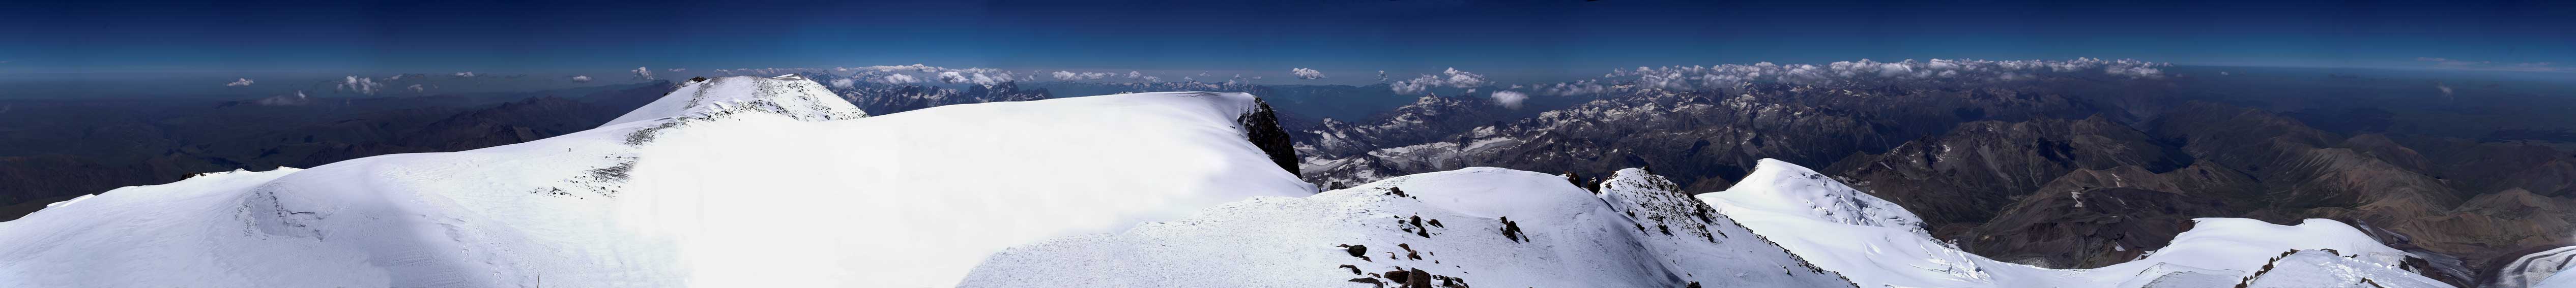 Pano from Mt. Elbruse (5642 m)
---------
 (  ,      )